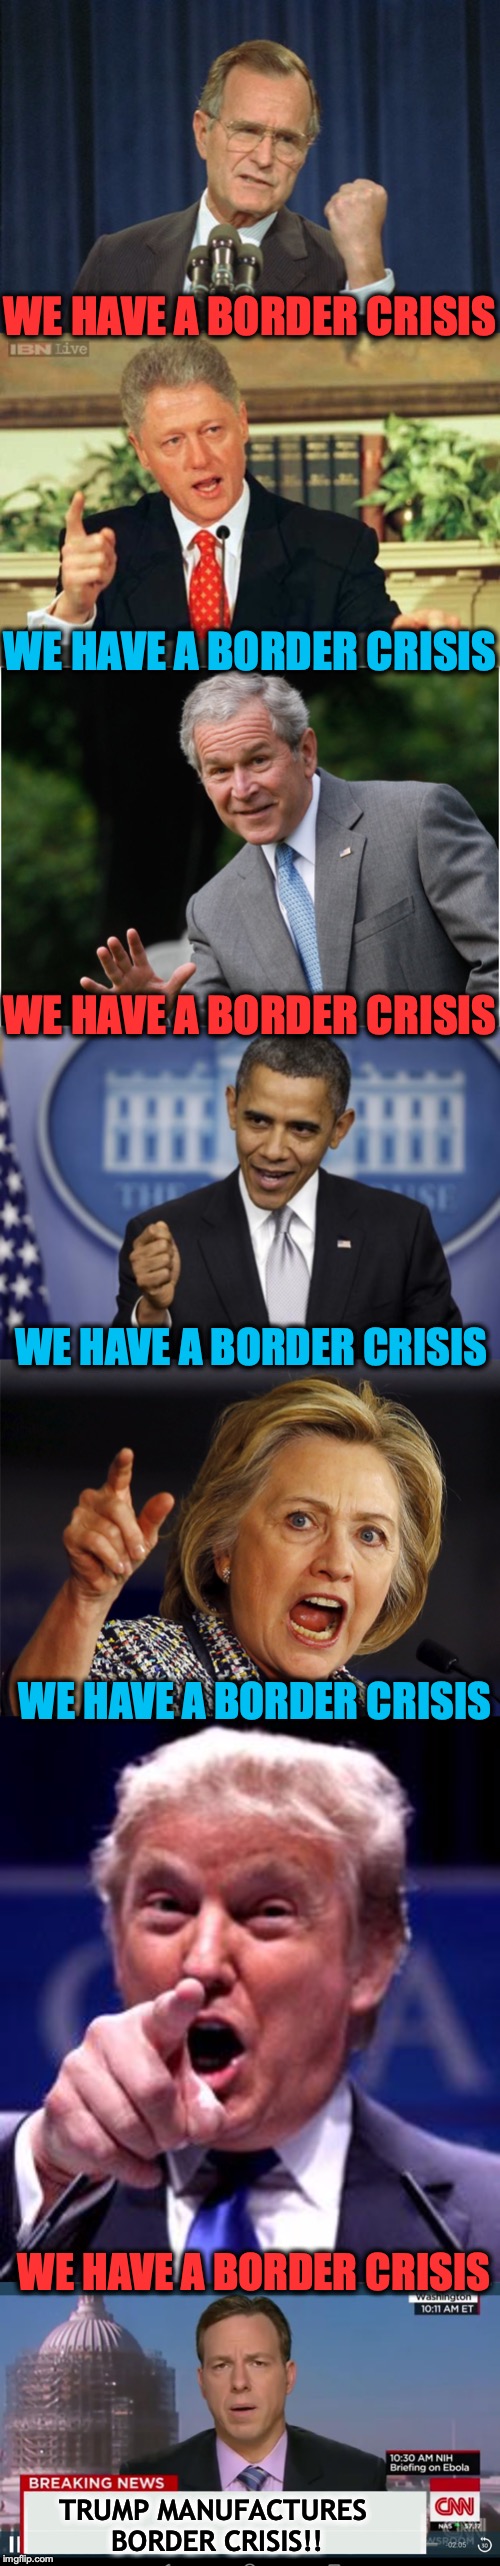 Time After Time | WE HAVE A BORDER CRISIS; WE HAVE A BORDER CRISIS; WE HAVE A BORDER CRISIS; WE HAVE A BORDER CRISIS; WE HAVE A BORDER CRISIS; WE HAVE A BORDER CRISIS; TRUMP MANUFACTURES BORDER CRISIS!! | image tagged in bush,bill clinton,obama,hillary clinton,donald trump,fake news | made w/ Imgflip meme maker